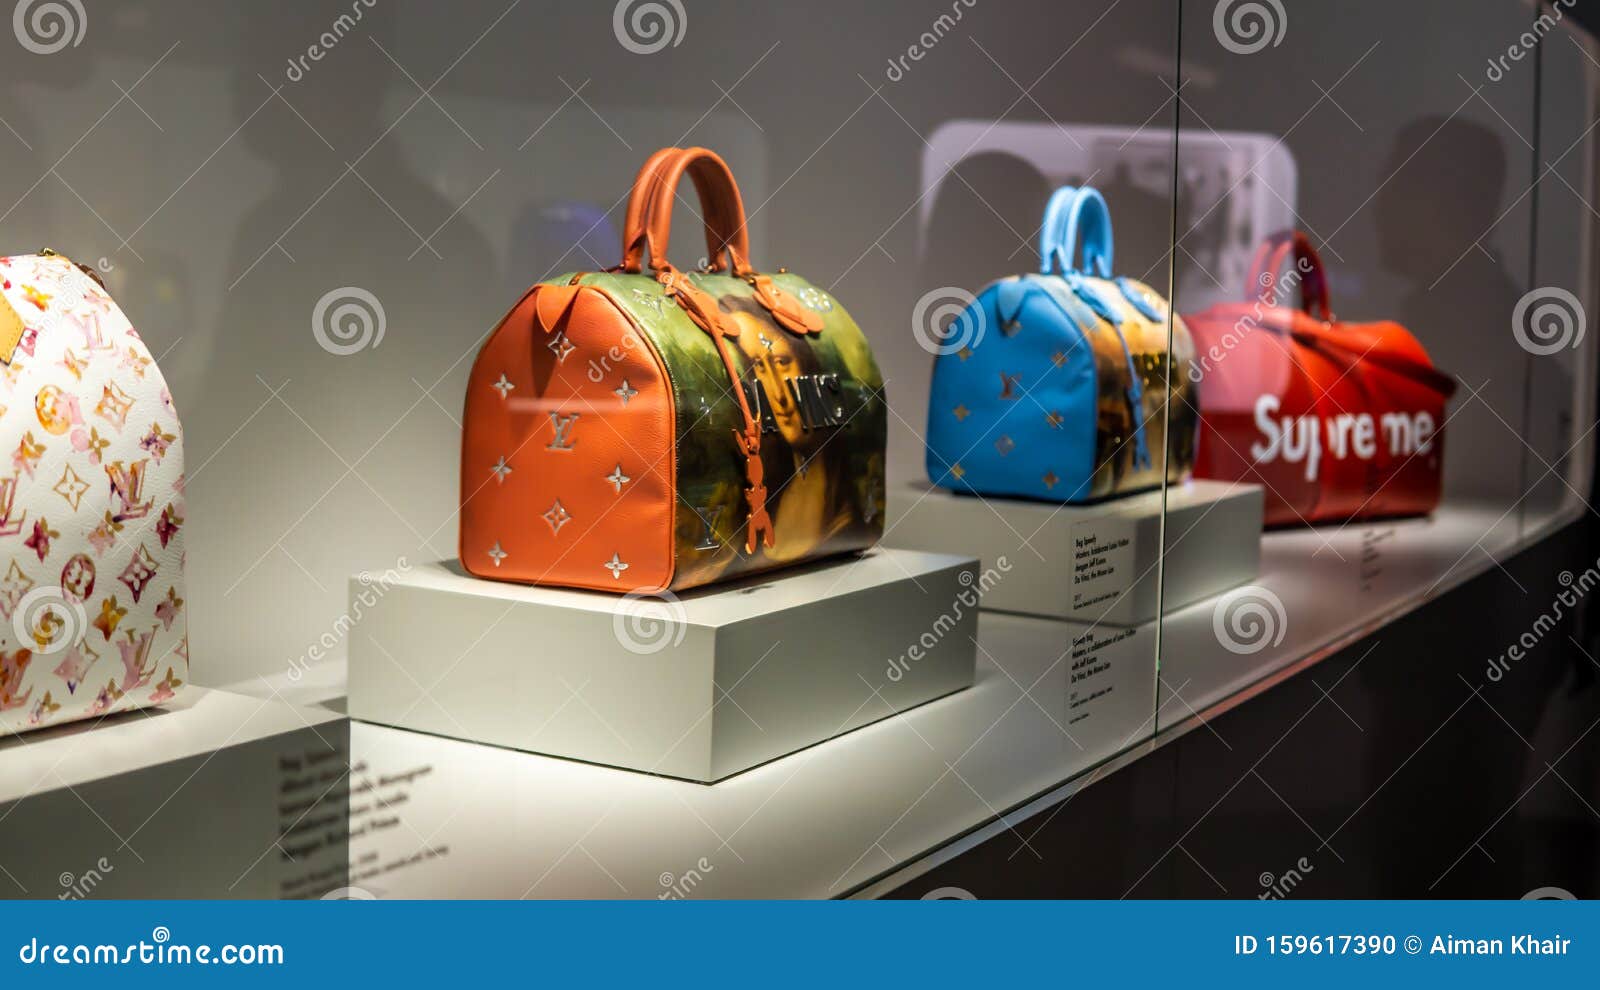 Louis Vuitton Keepall Bag Collections Showcase at the Time Capsule